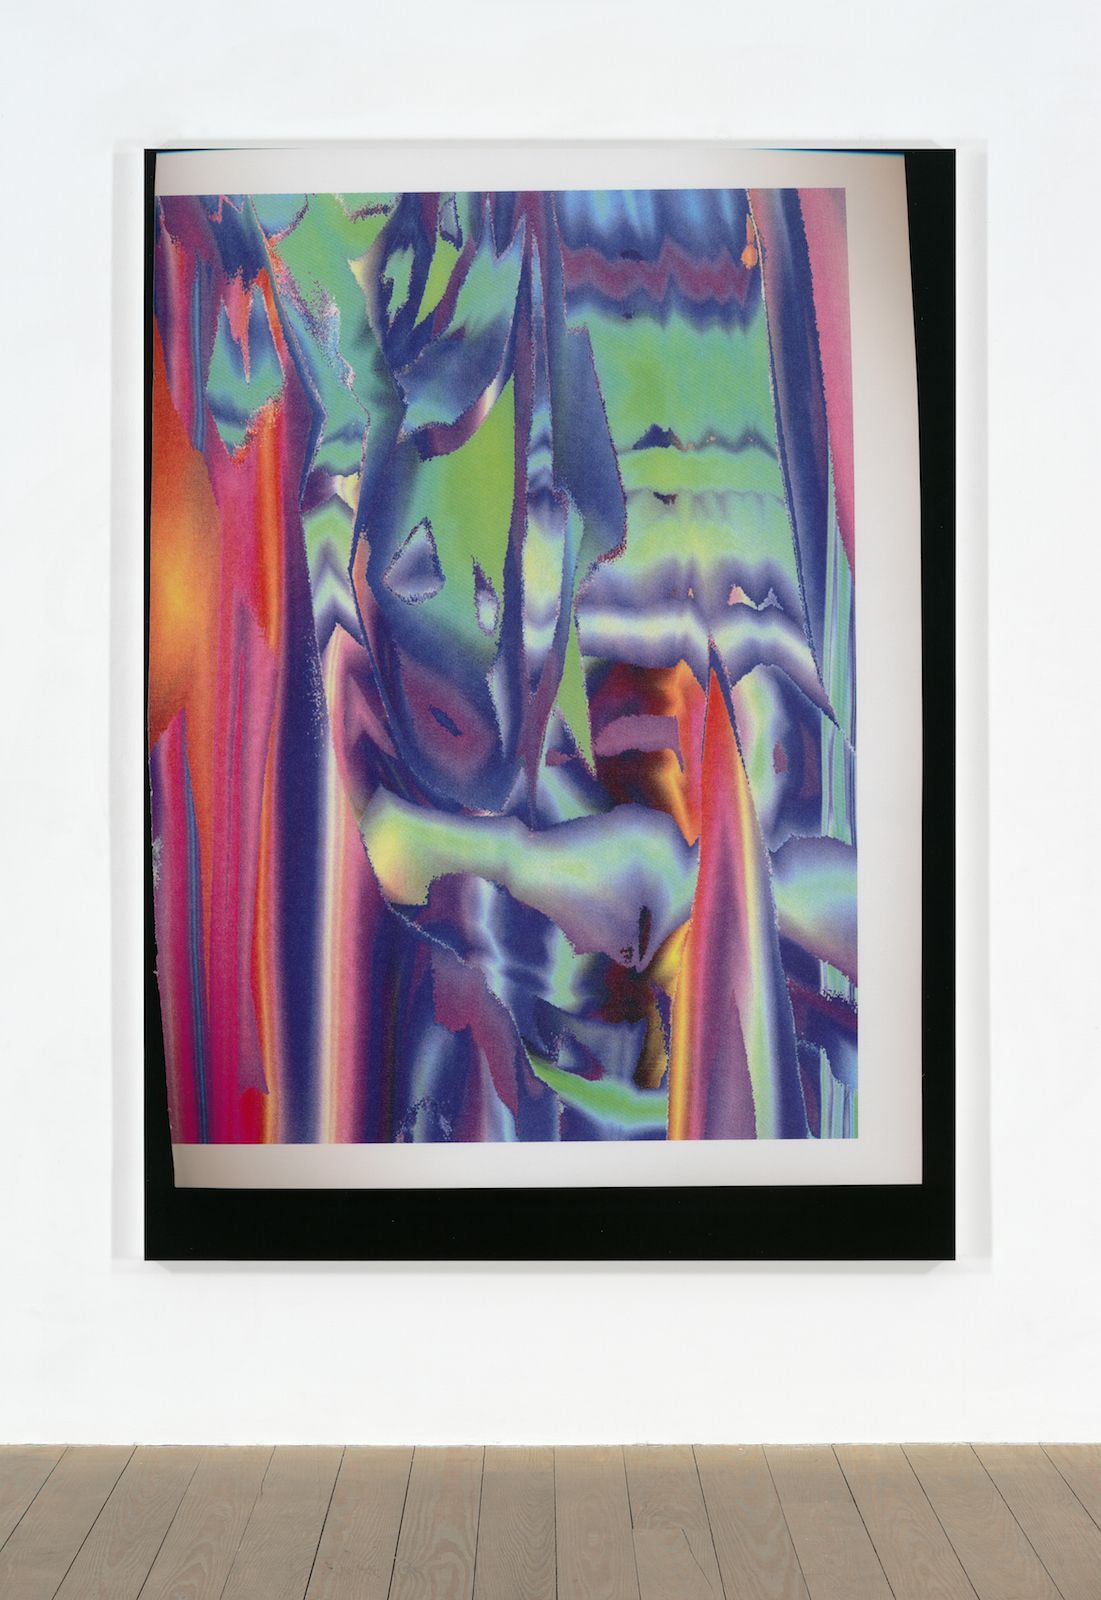 Travess Smalley, Untitled (Feb_24_2015_Floral_LuluBook_Scan 13), 2015, UV coated digital pigment print mounted on aluminum frame, 81 1⁄2  × 59 1⁄2  × 1 1⁄2  in. ( 207.01  × 151.13  × 3.81  cm)